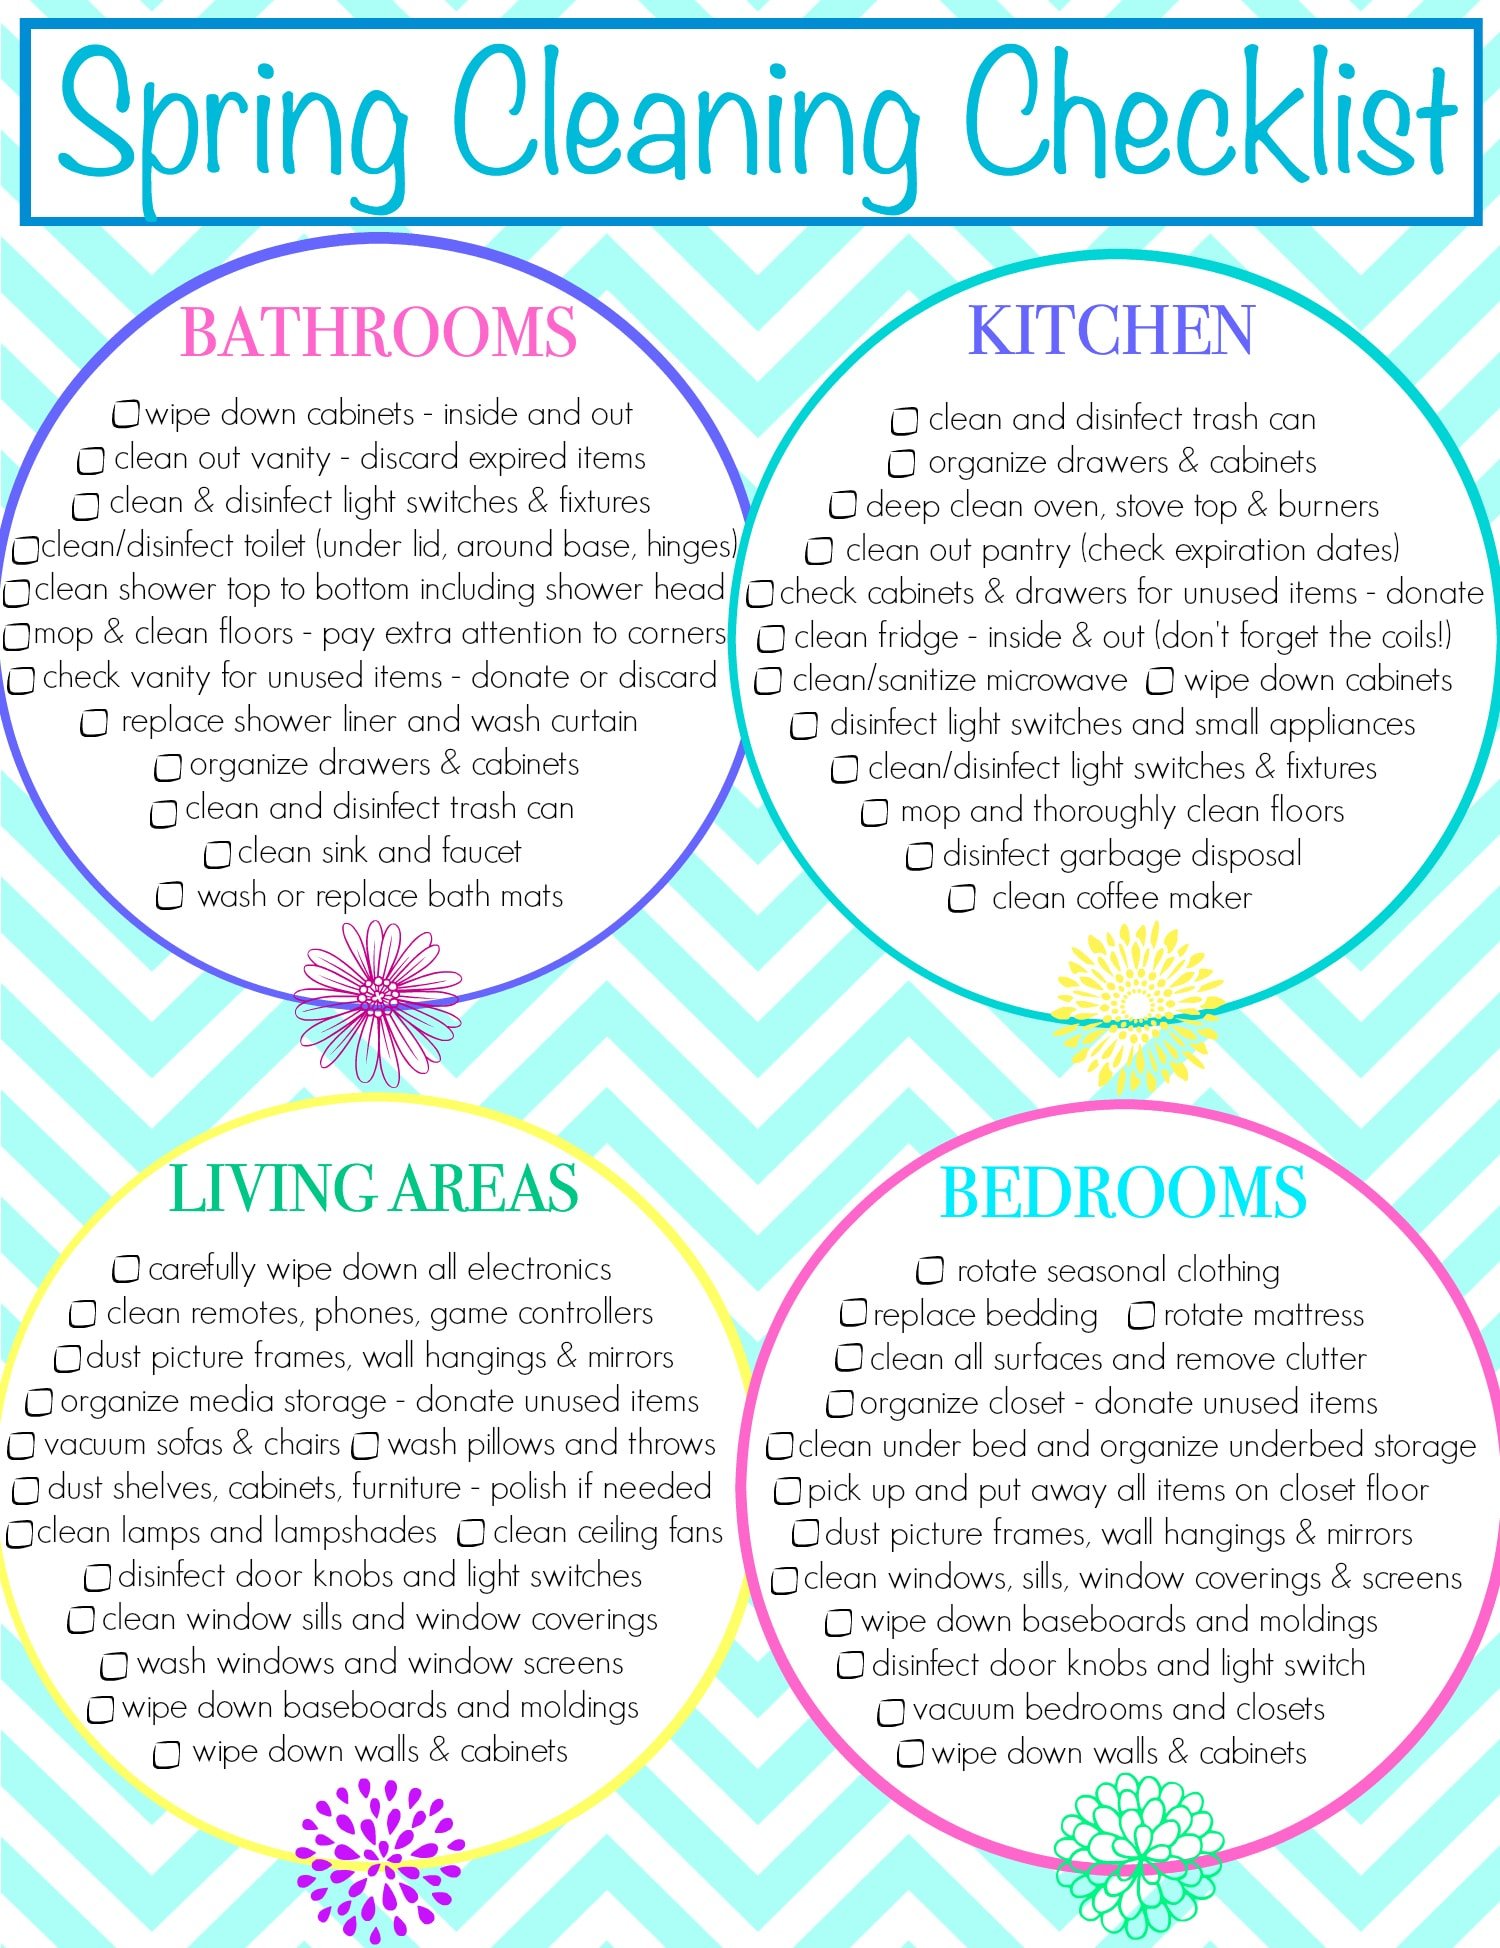 Get a jump start on spring cleaning this year with this printable Spring Cleaning Checklist! Plus I've got included my favorite tips and tricks that will have your home sparkling in no time! // Mom On Timeout